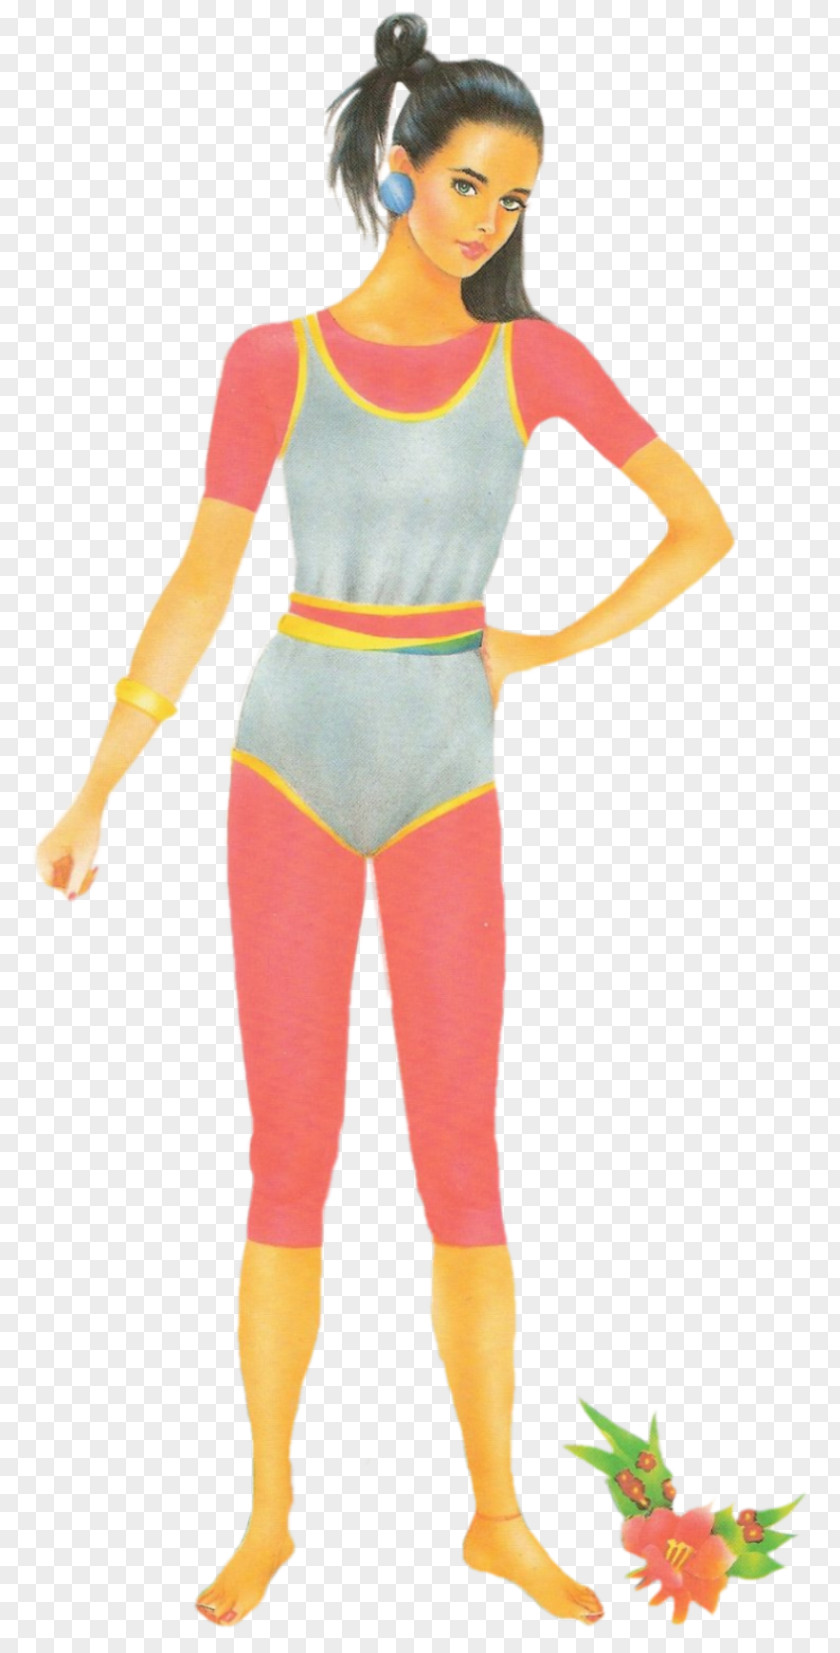 Fanny Character Costume Bodysuits & Unitards Spandex Fiction PNG